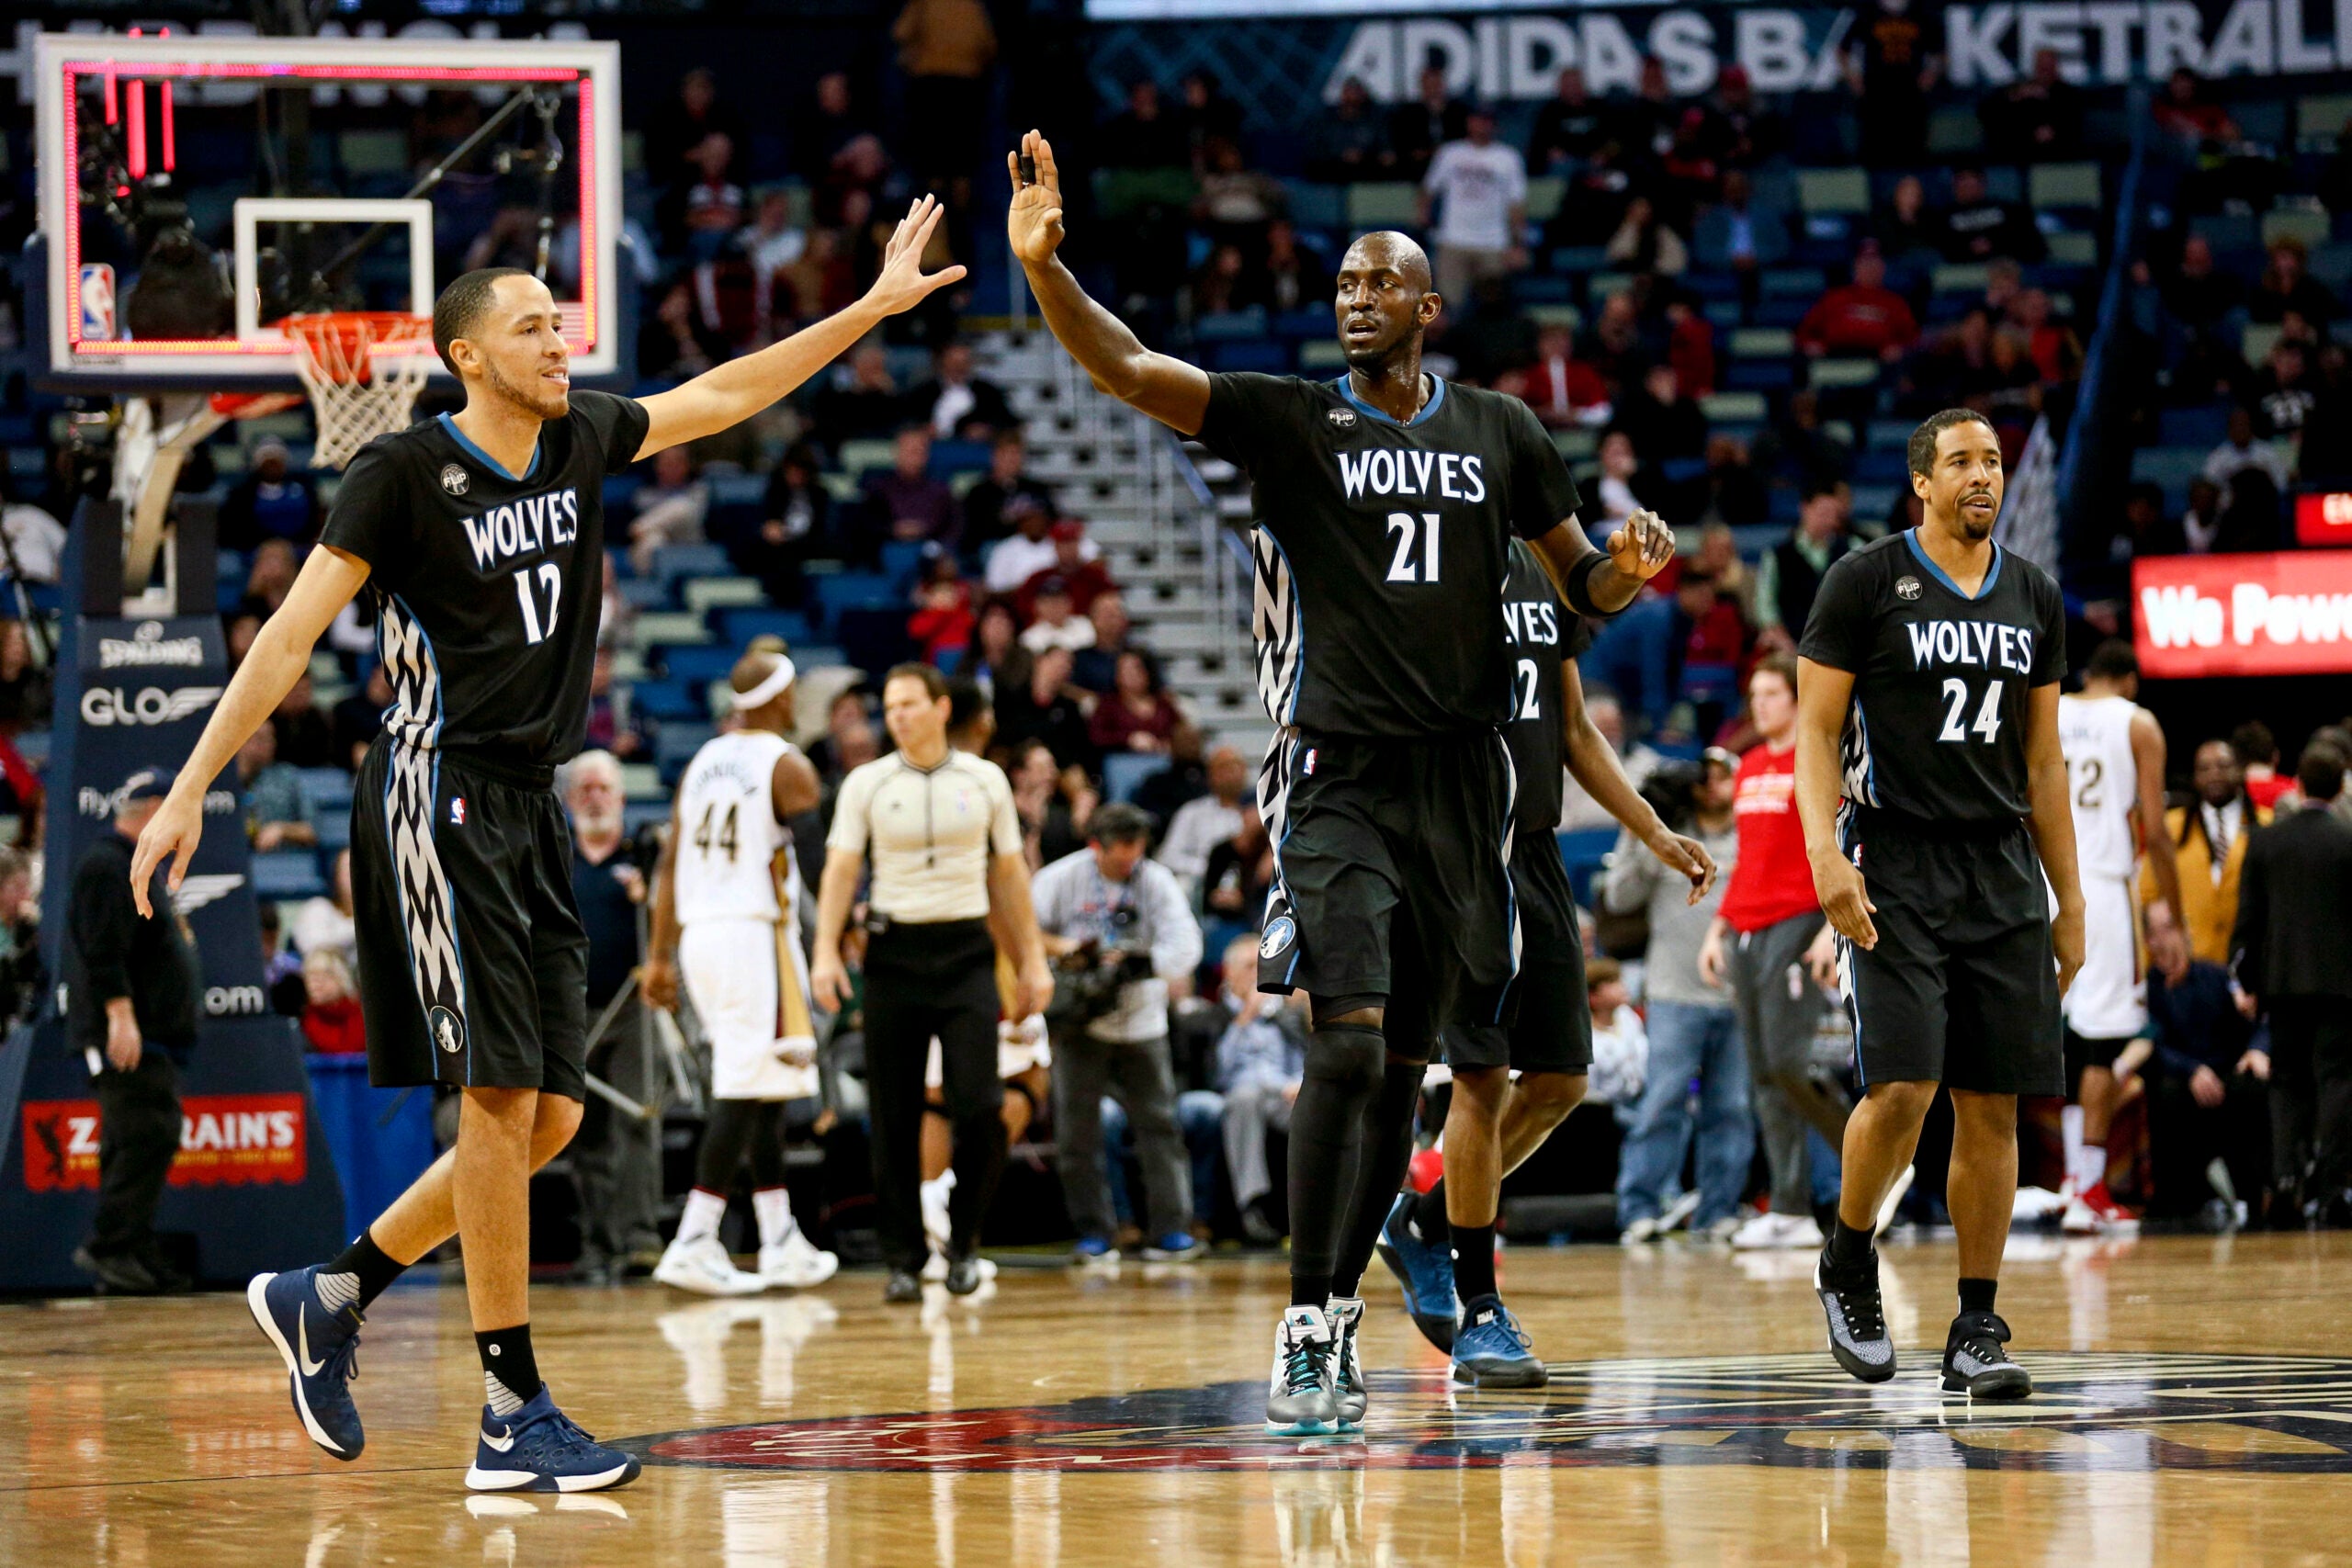 Kevin Garnett Comes Home: Minnesota Brings Back the King of the North